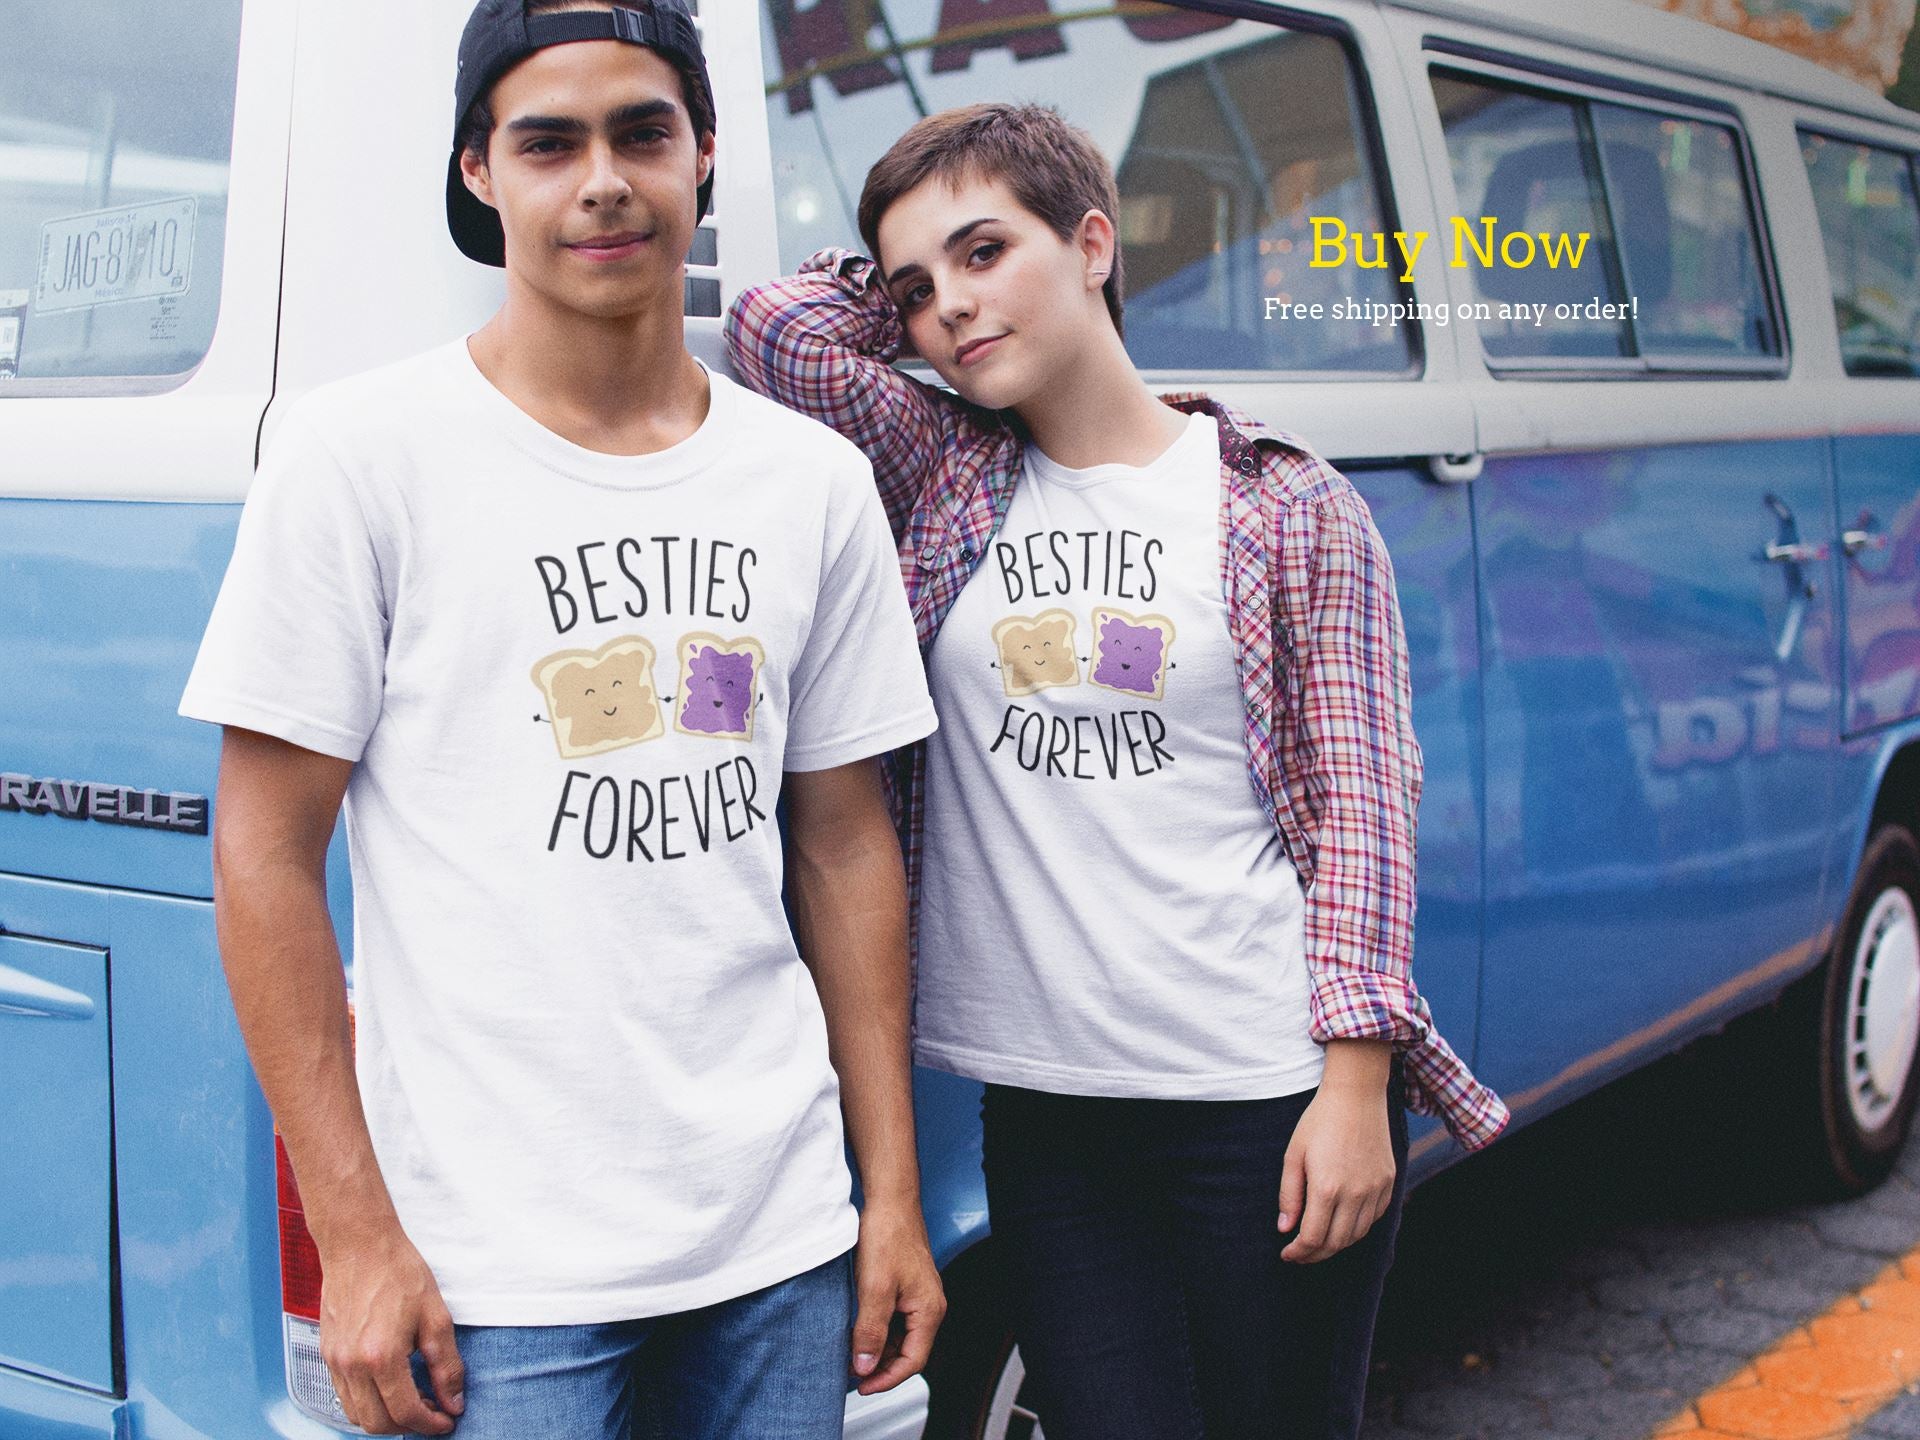 Besties Forever Like Peanut Butter and Jelly Special White T Shirt for Men and Women (Friends, Couples, Parents) freeshipping - Catch My Drift India